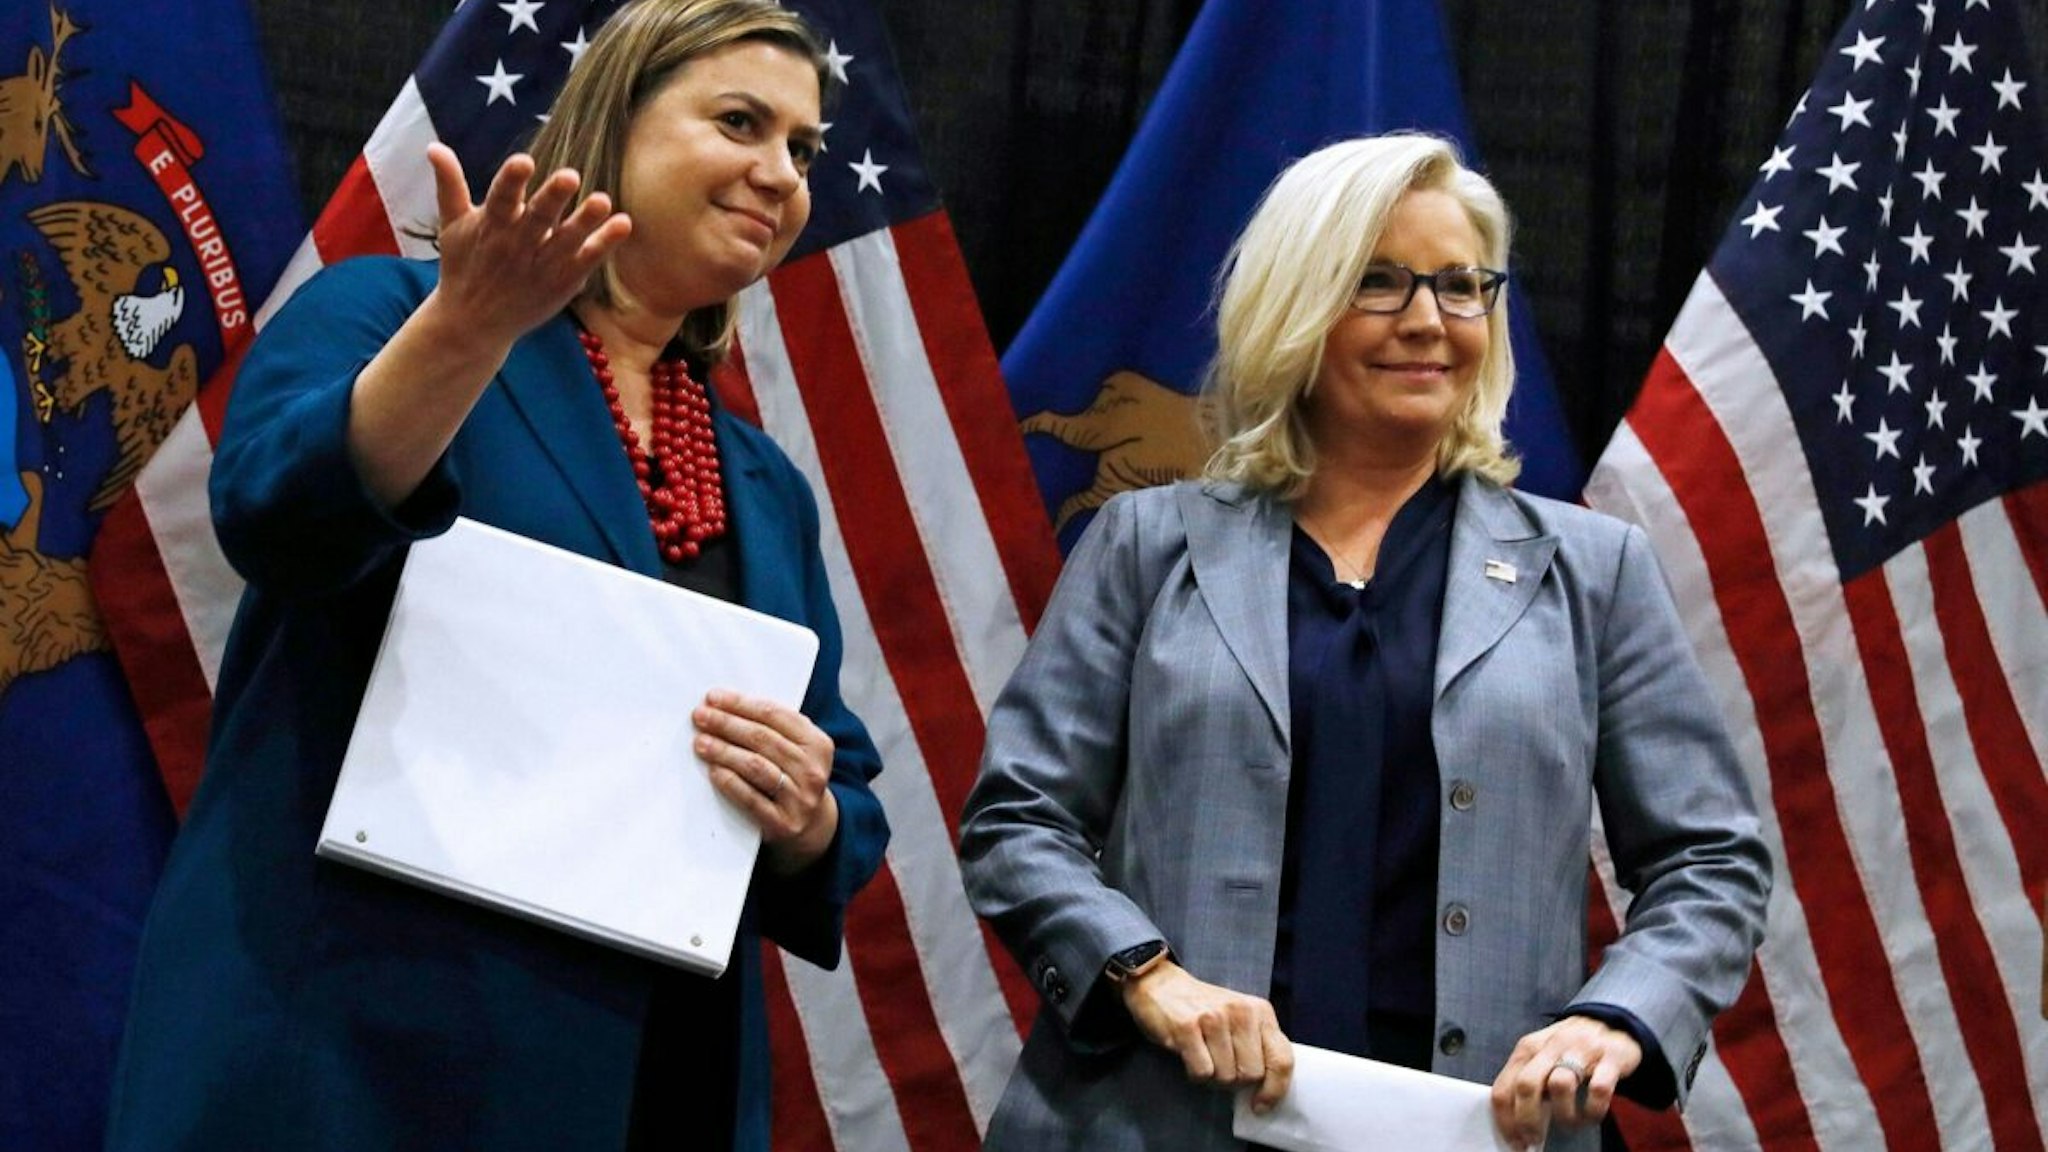 US Representative Liz Cheney (R) (R-WY) attends a campaign event in support of the re-election bid of US Representative Elissa Slotkin (L) (D-MI) during "An Evening for Patriotism and Bipartisanship" campaign event at East Lansing High School in Lansing, Michigan, on November 1, 2022